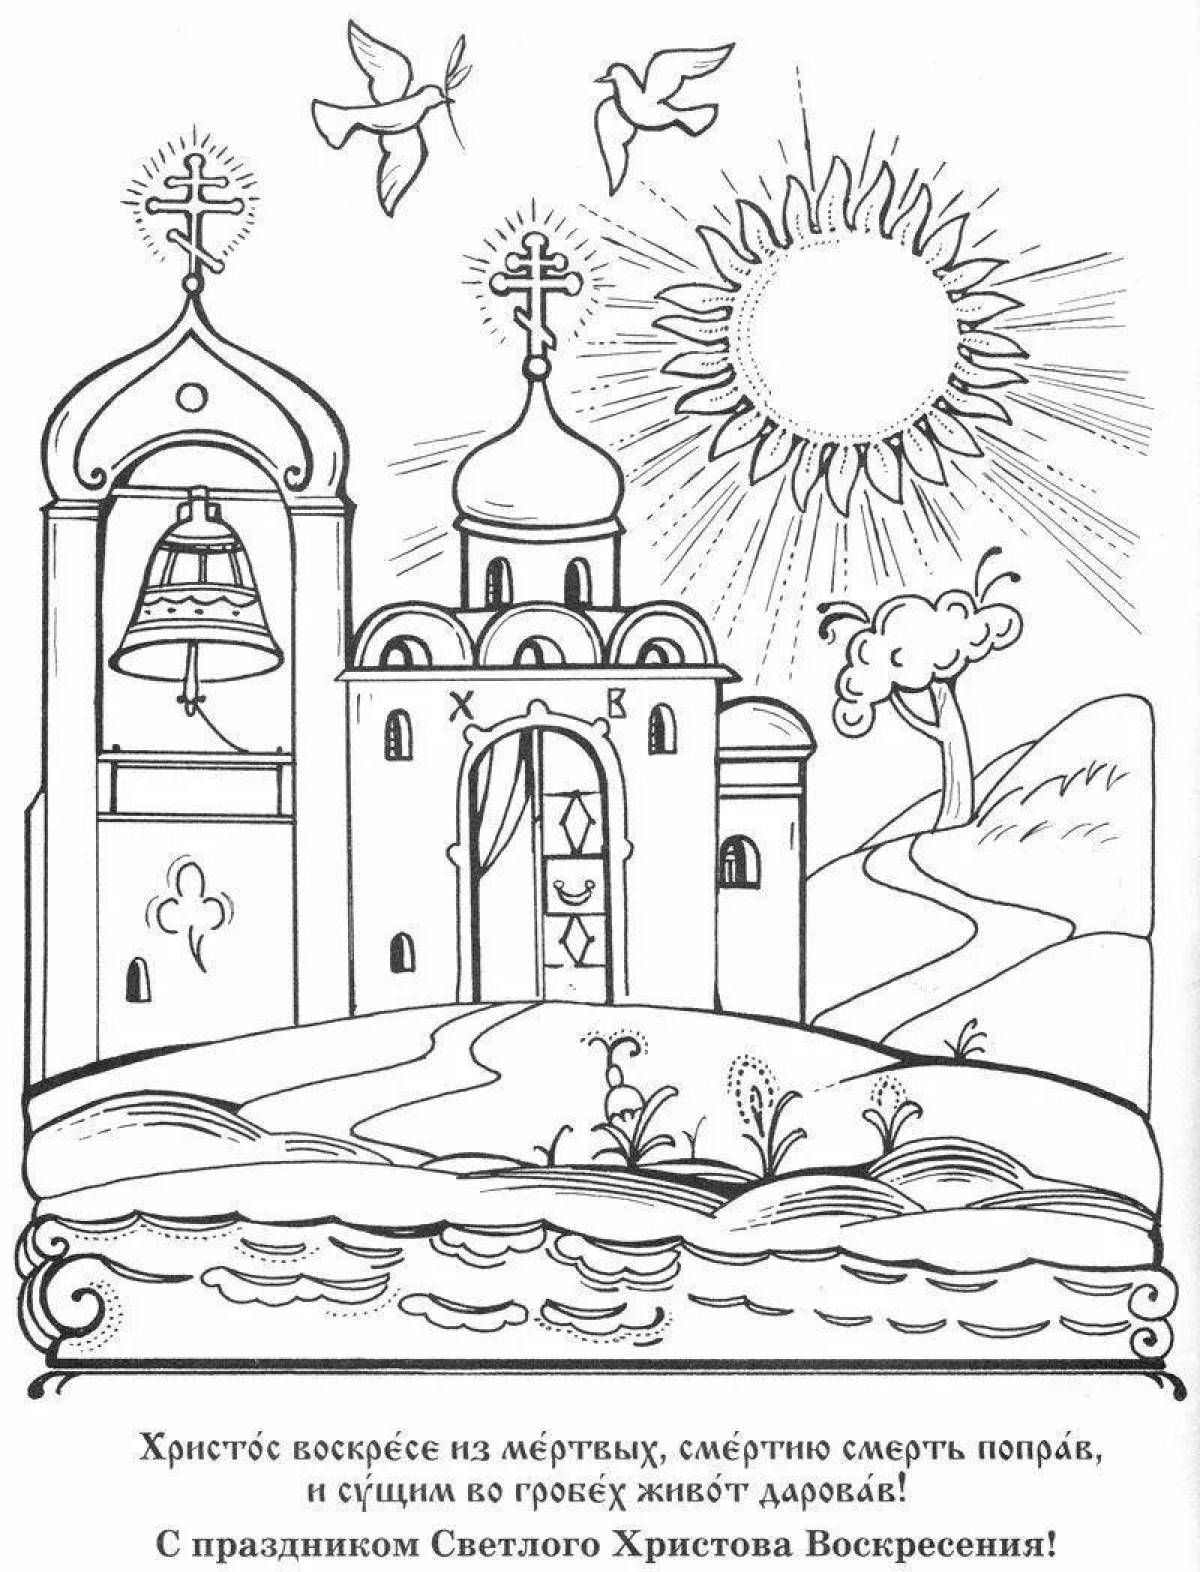 Bright Orthodox holiday coloring book